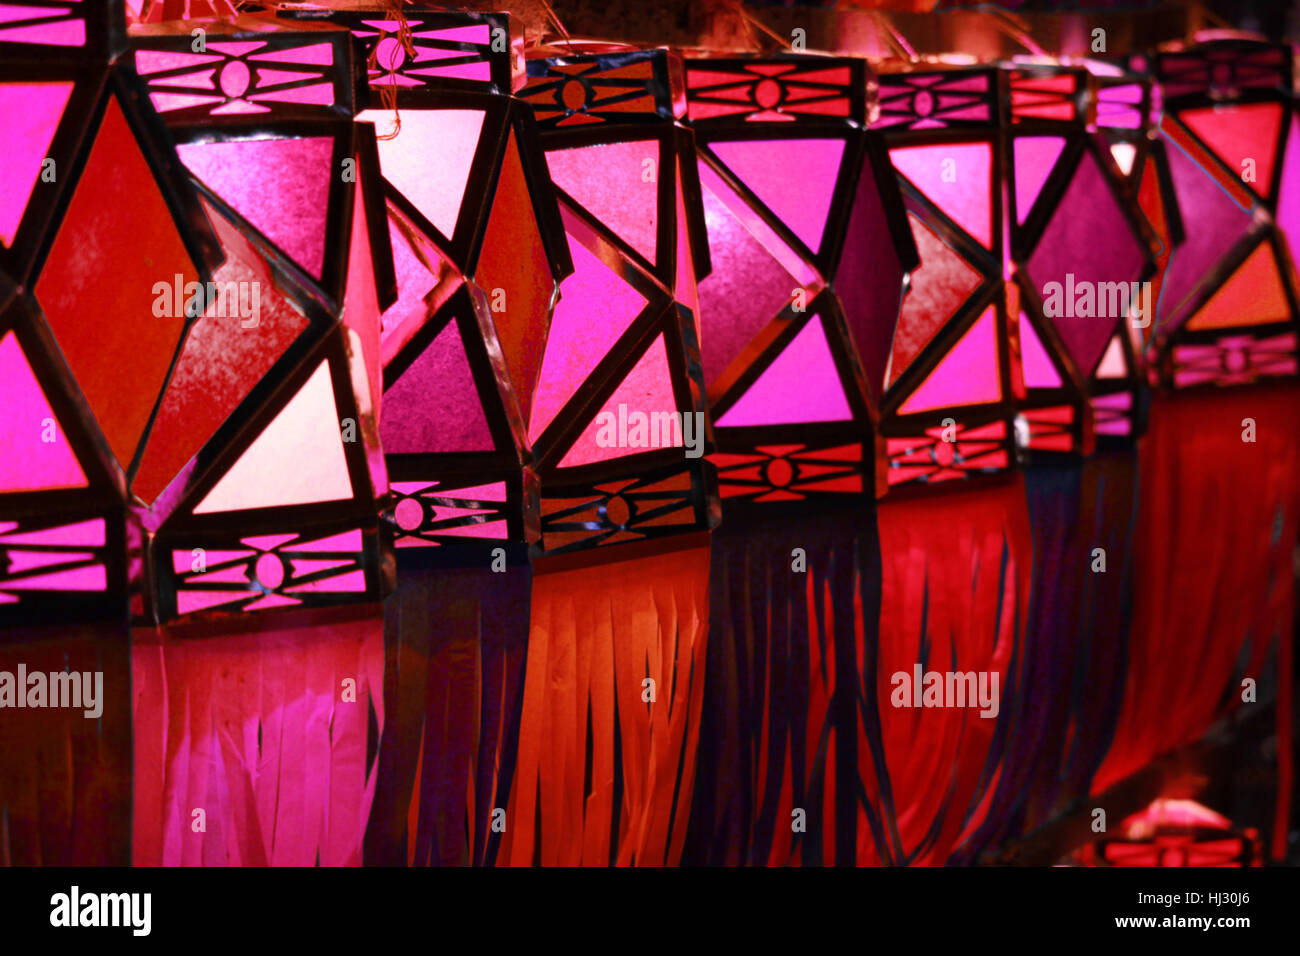 A line of traditional handmade Diwali lanters in red color used for decoration in the hindu festival in India. Stock Photo